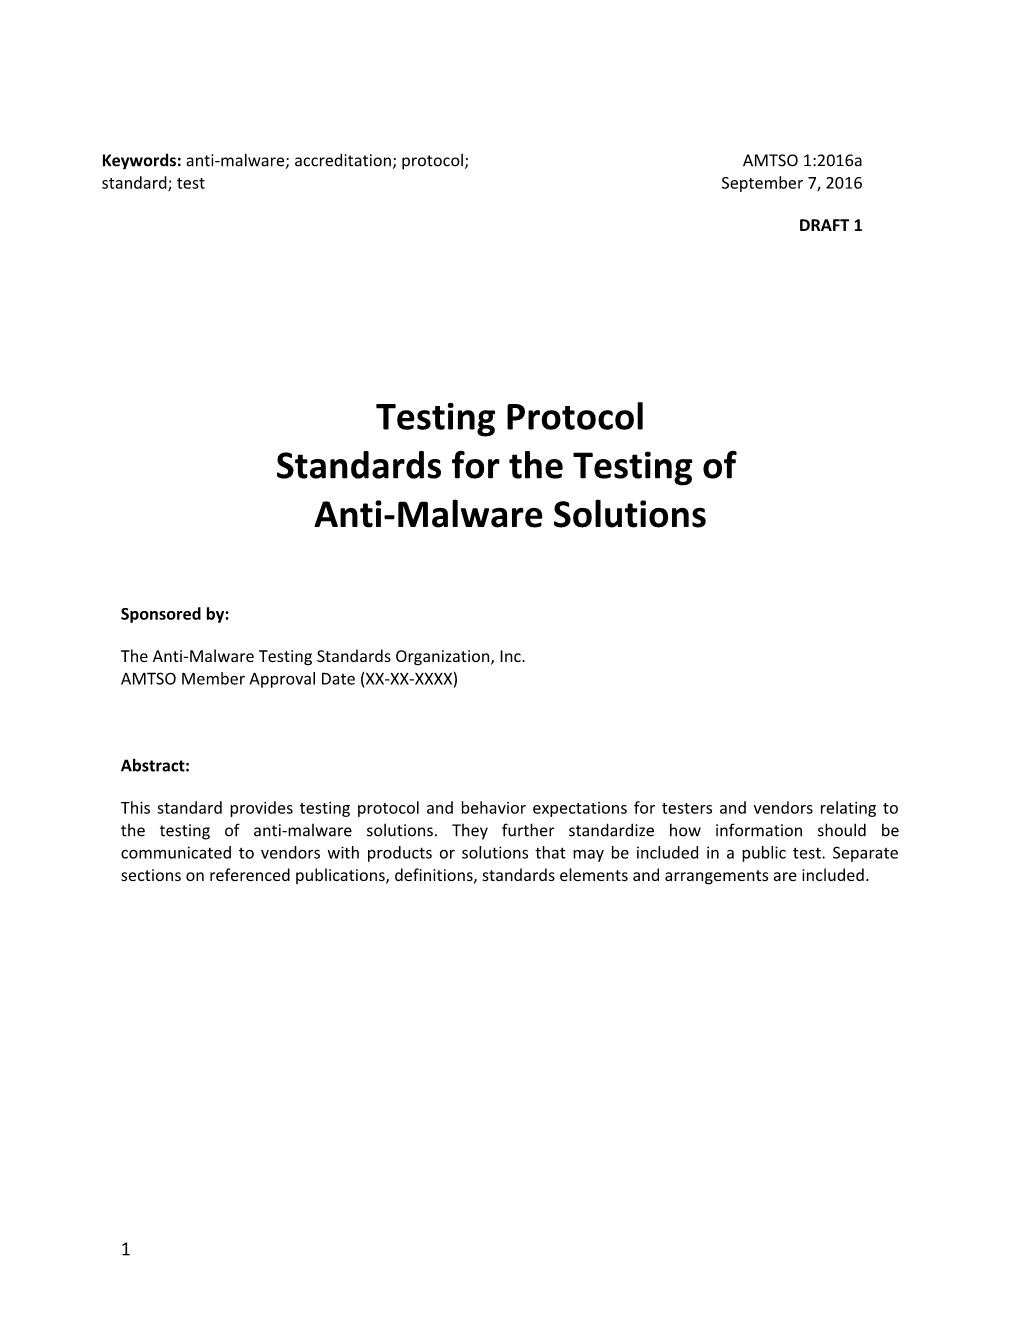 Testing Protocol Standards for the Testing of Anti-Malware Solutions